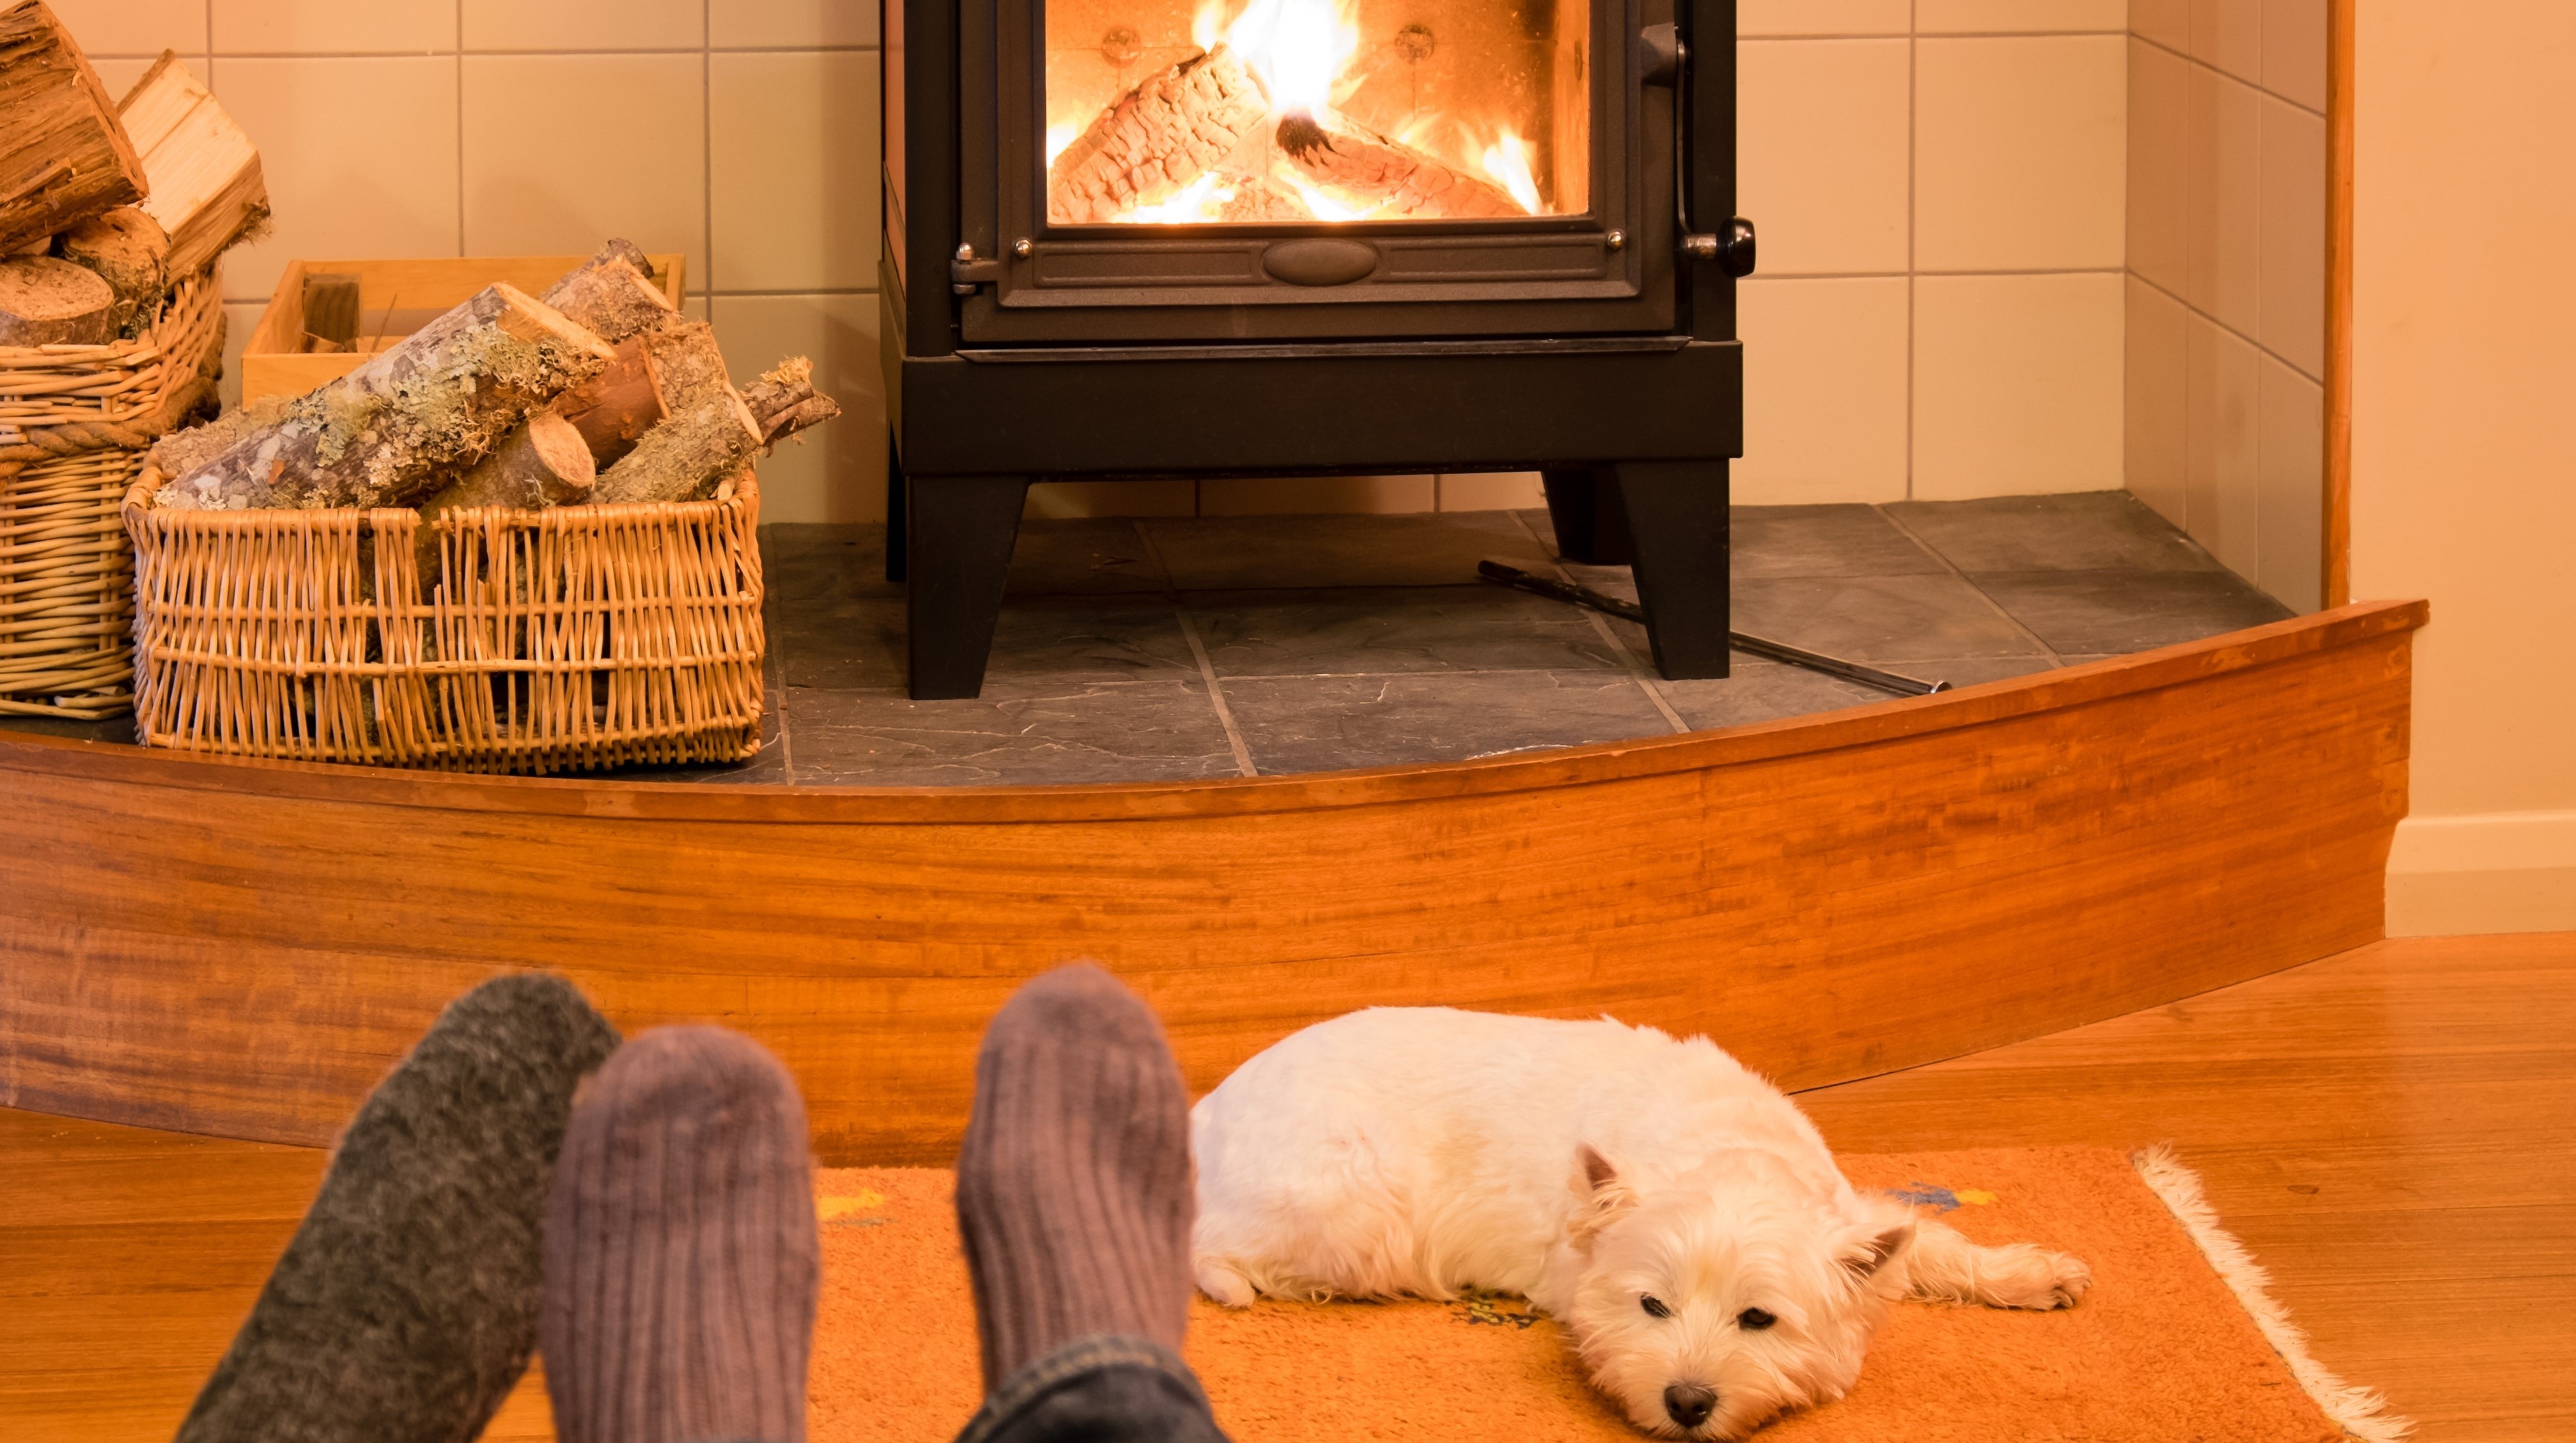 A small white dog lies in front of a burning wood burner